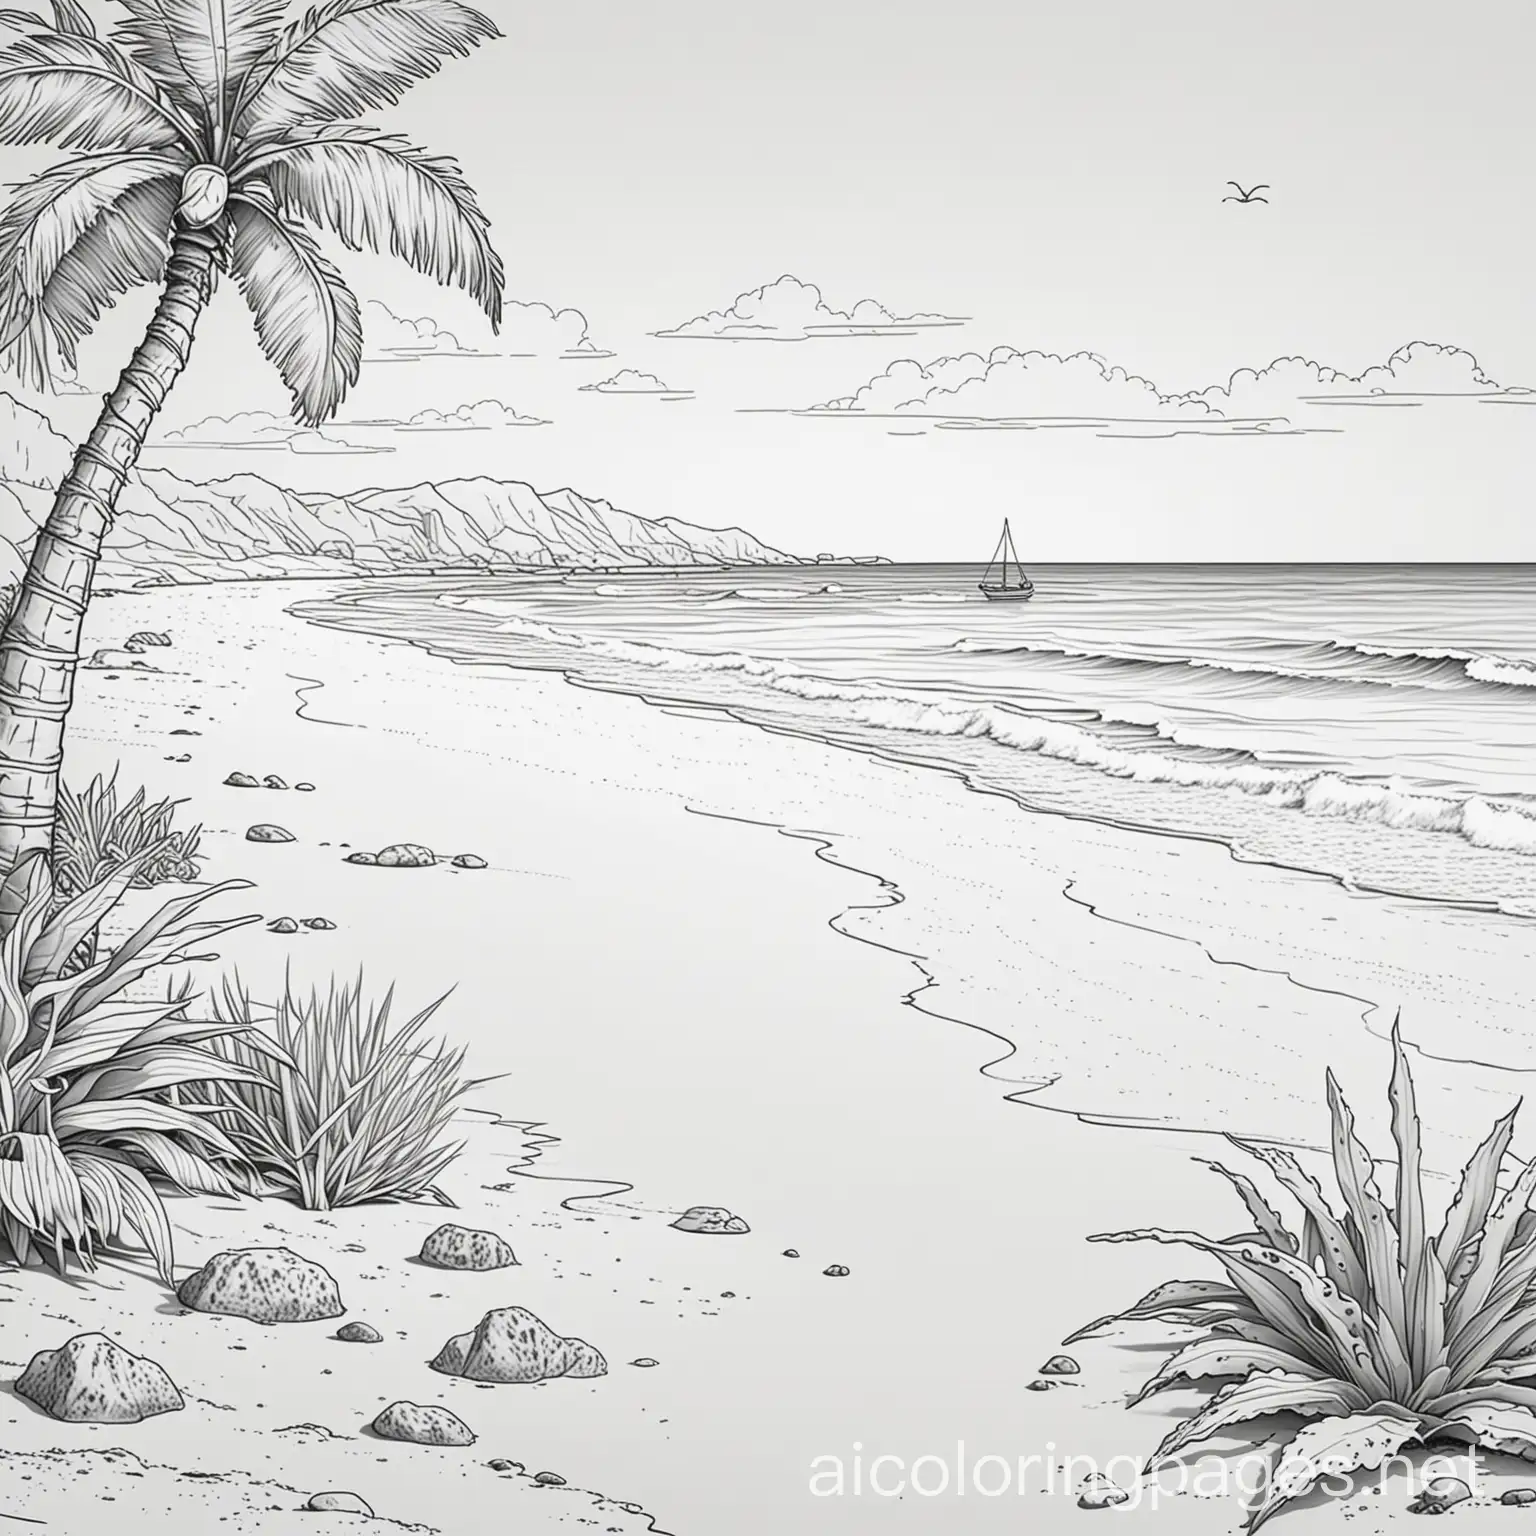 a Kids beach holiday scene, Coloring Page, black and white, line art, white background, Simplicity, Ample White Space. The background of the coloring page is plain white to make it easy for young children to color within the lines. The outlines of all the subjects are easy to distinguish, making it simple for kids to color without too much difficulty